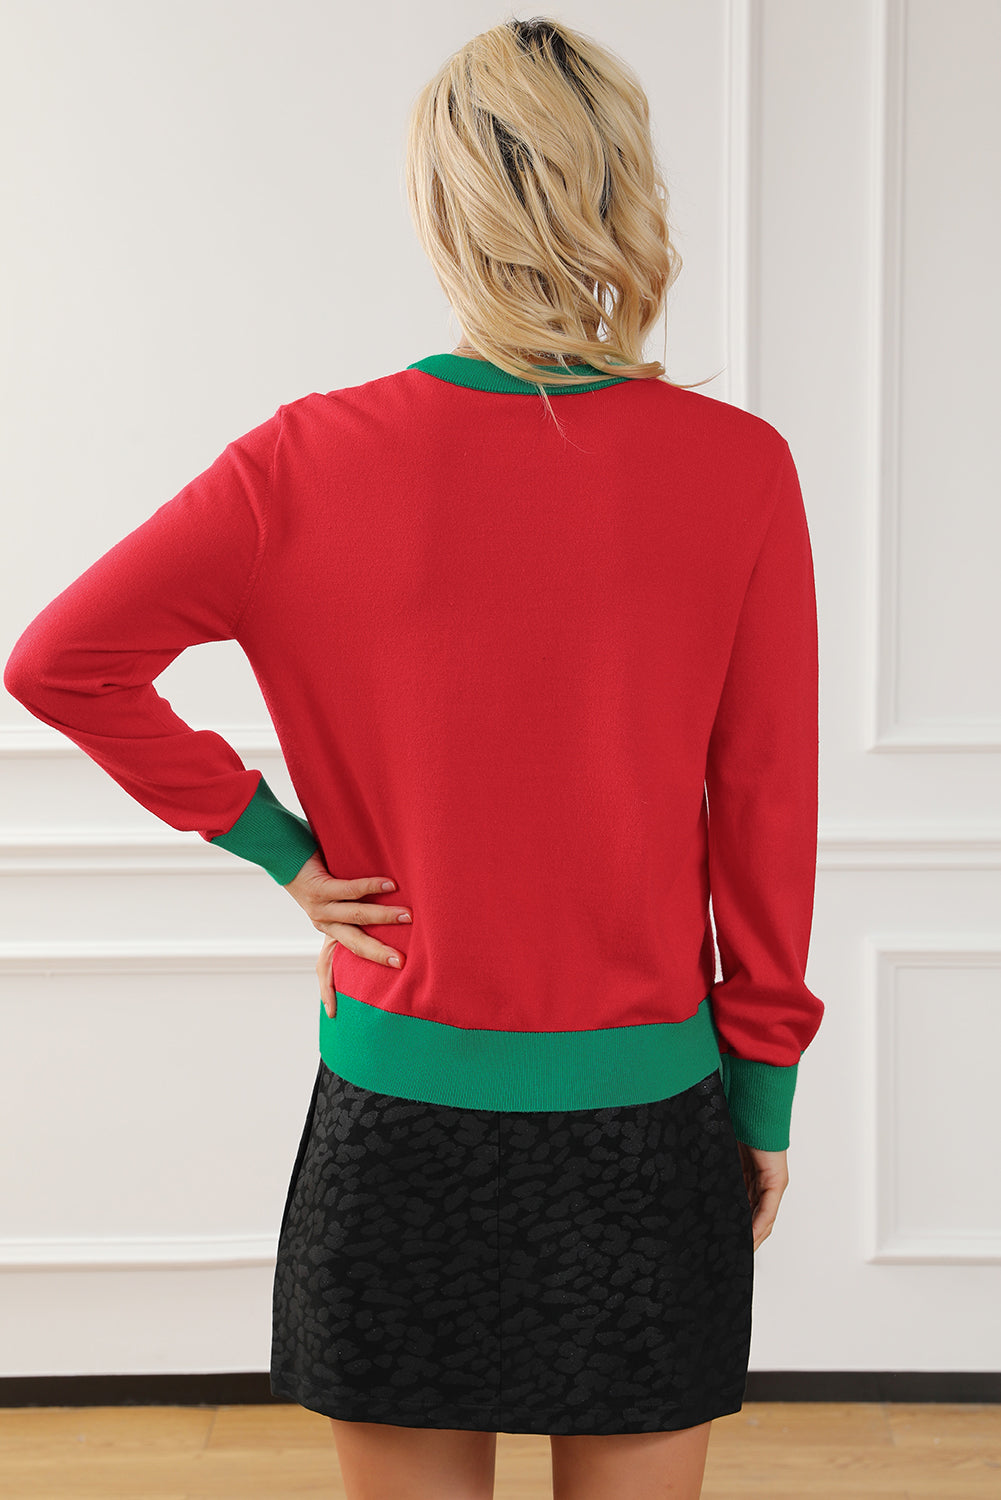 - Holly Jolly Round Neck, or Merry & Bright Christmas Sweater, or Other various Fall & Christmas Themed Sweaters - womens sweater at TFC&H Co.